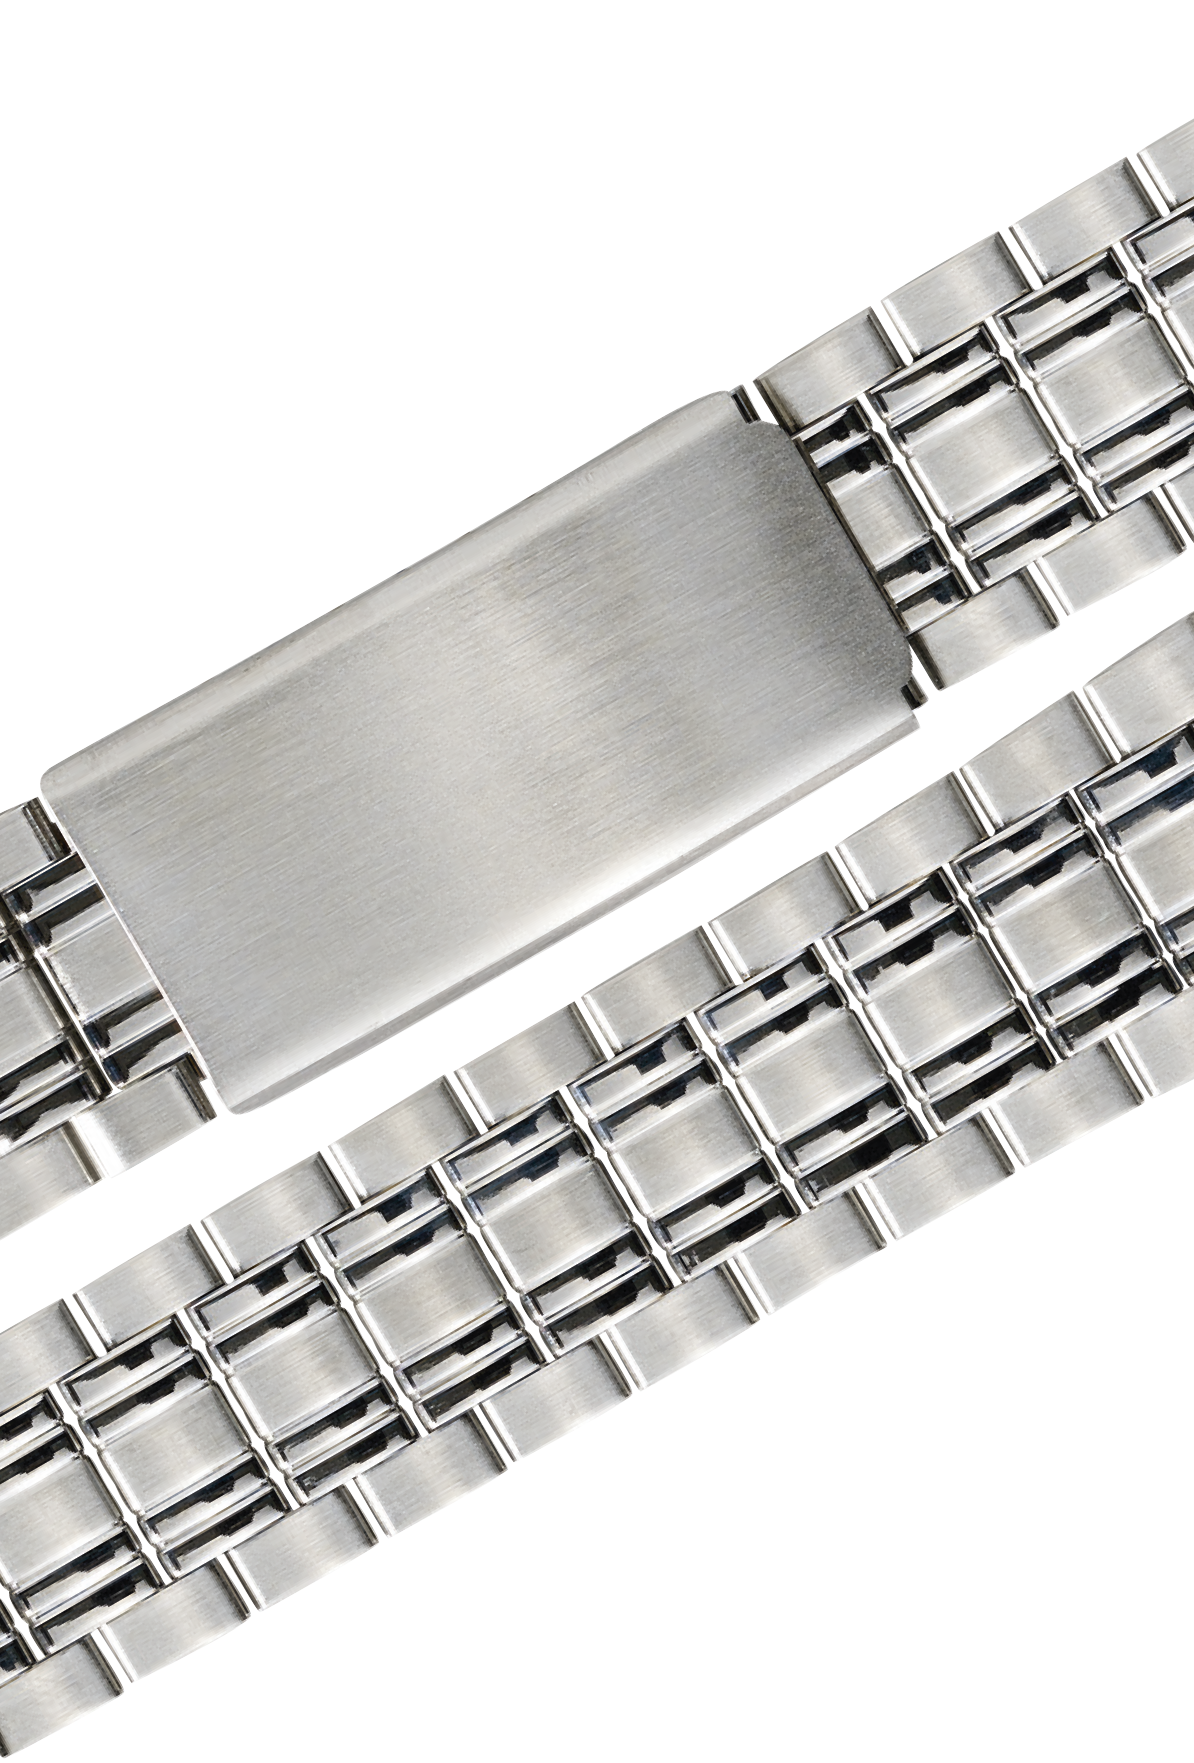 70-78126 Stalux 18/20mm stainless steel